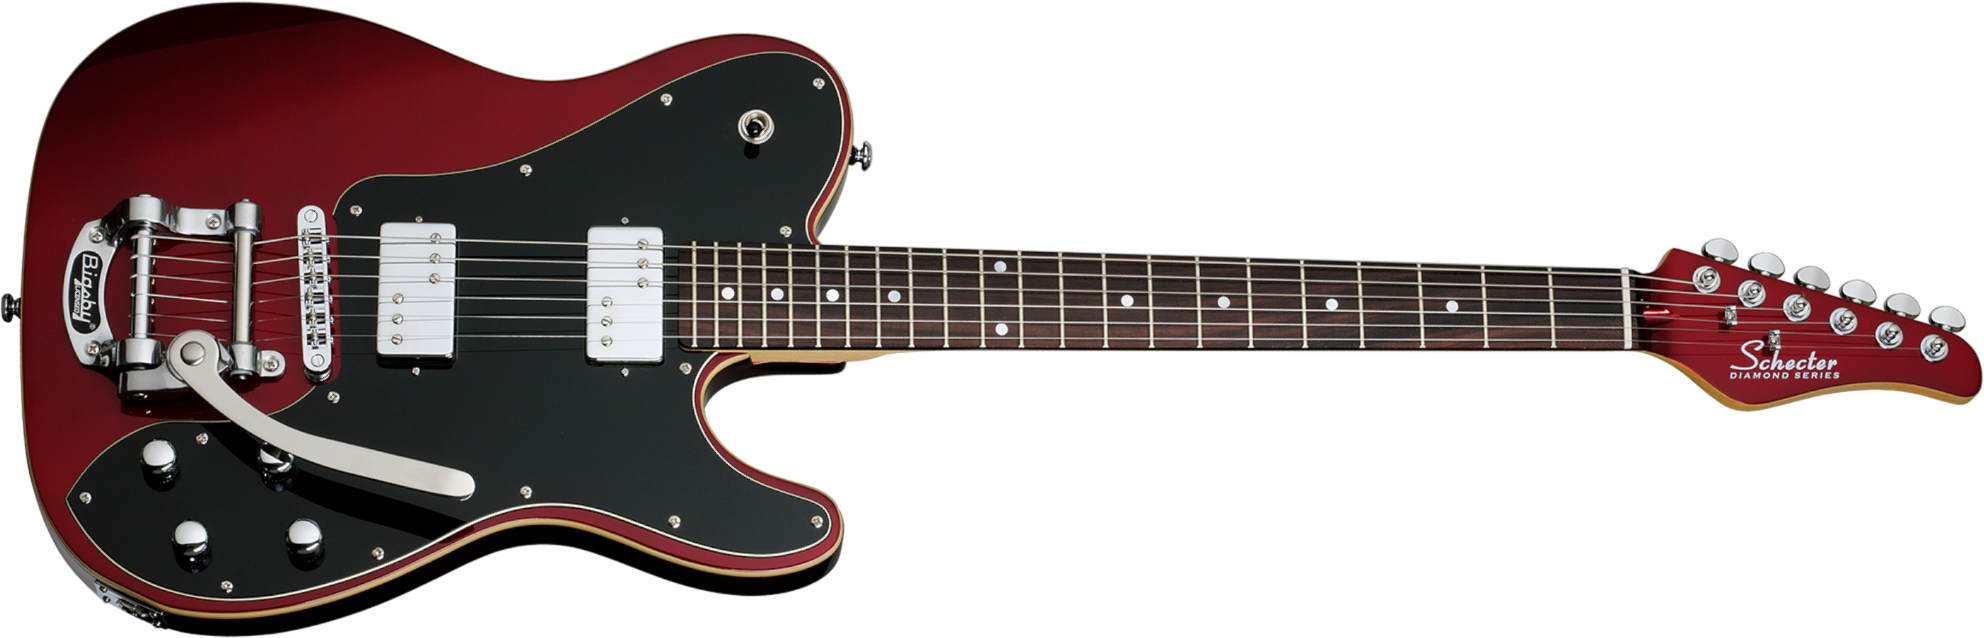 Schecter Pt Fastback Ii B Bigsby 2h Trem Bigsby Rw - Metallic Red - Tel shape electric guitar - Main picture